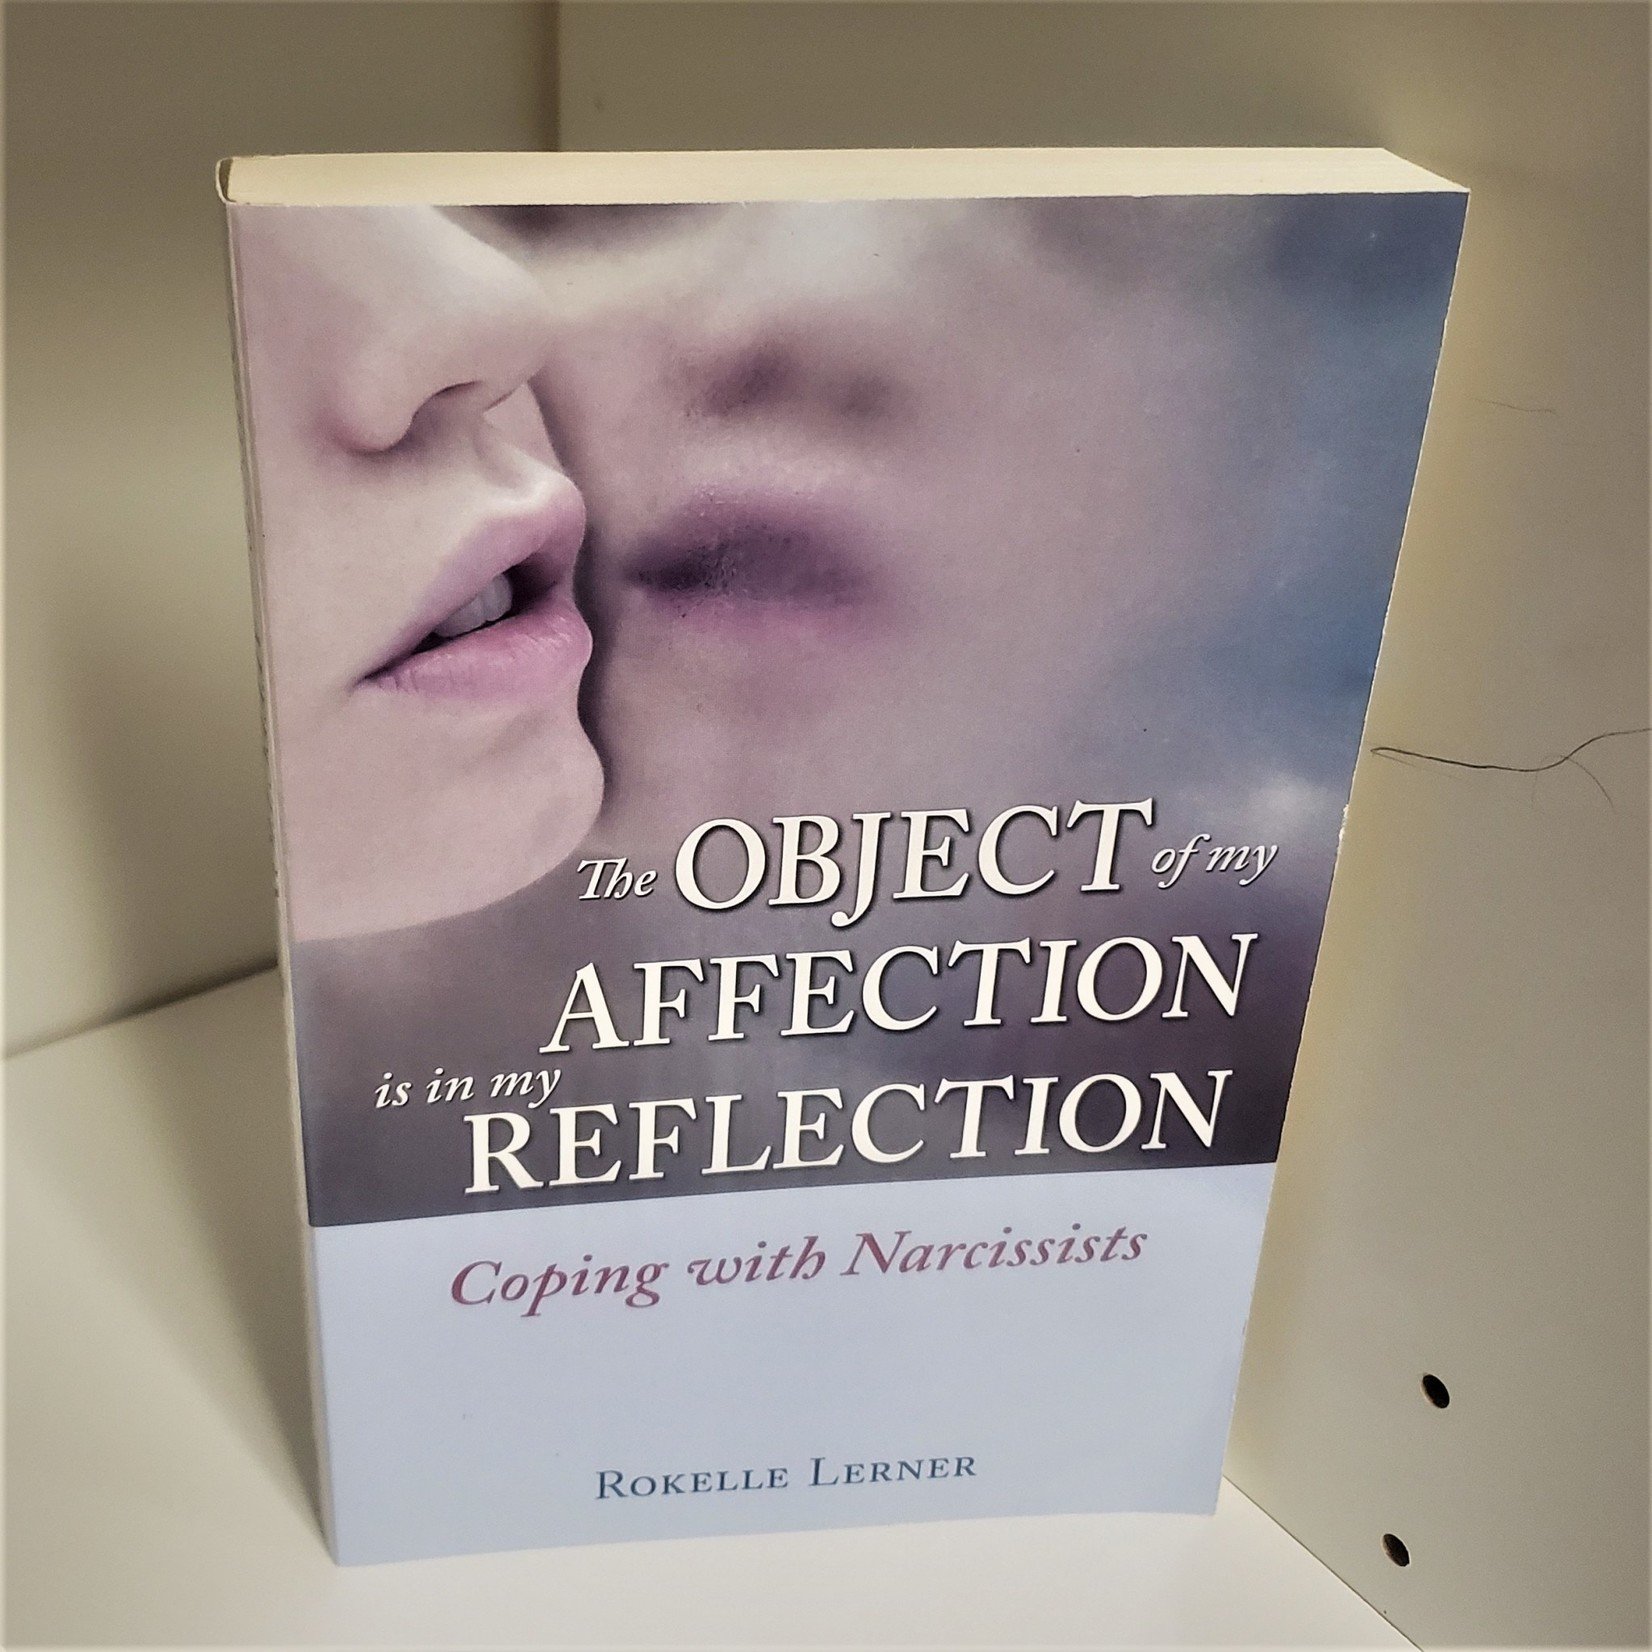 The Object of My Affection is in my Reflection